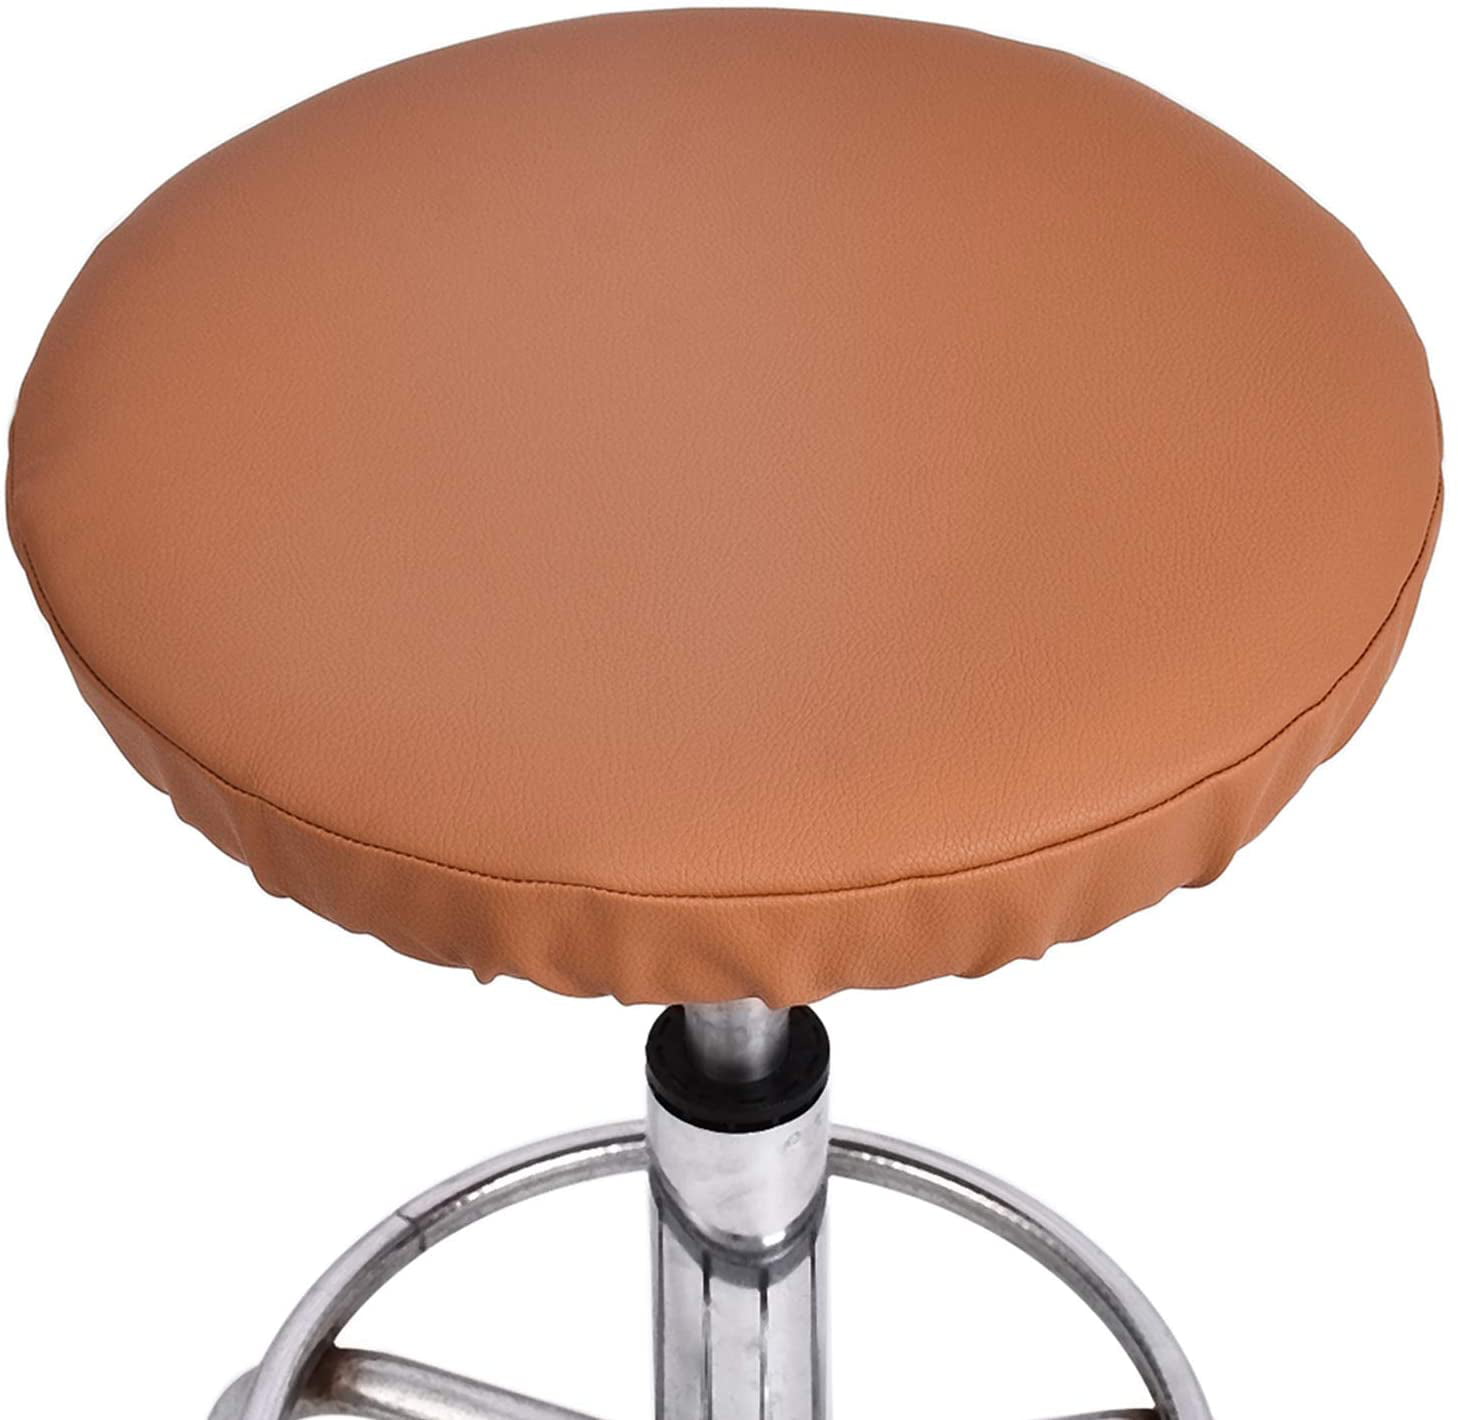 Hot Bar Stool Slipcover Dirtproof Round Chair Protector Stretchy Seat Cover Gear 